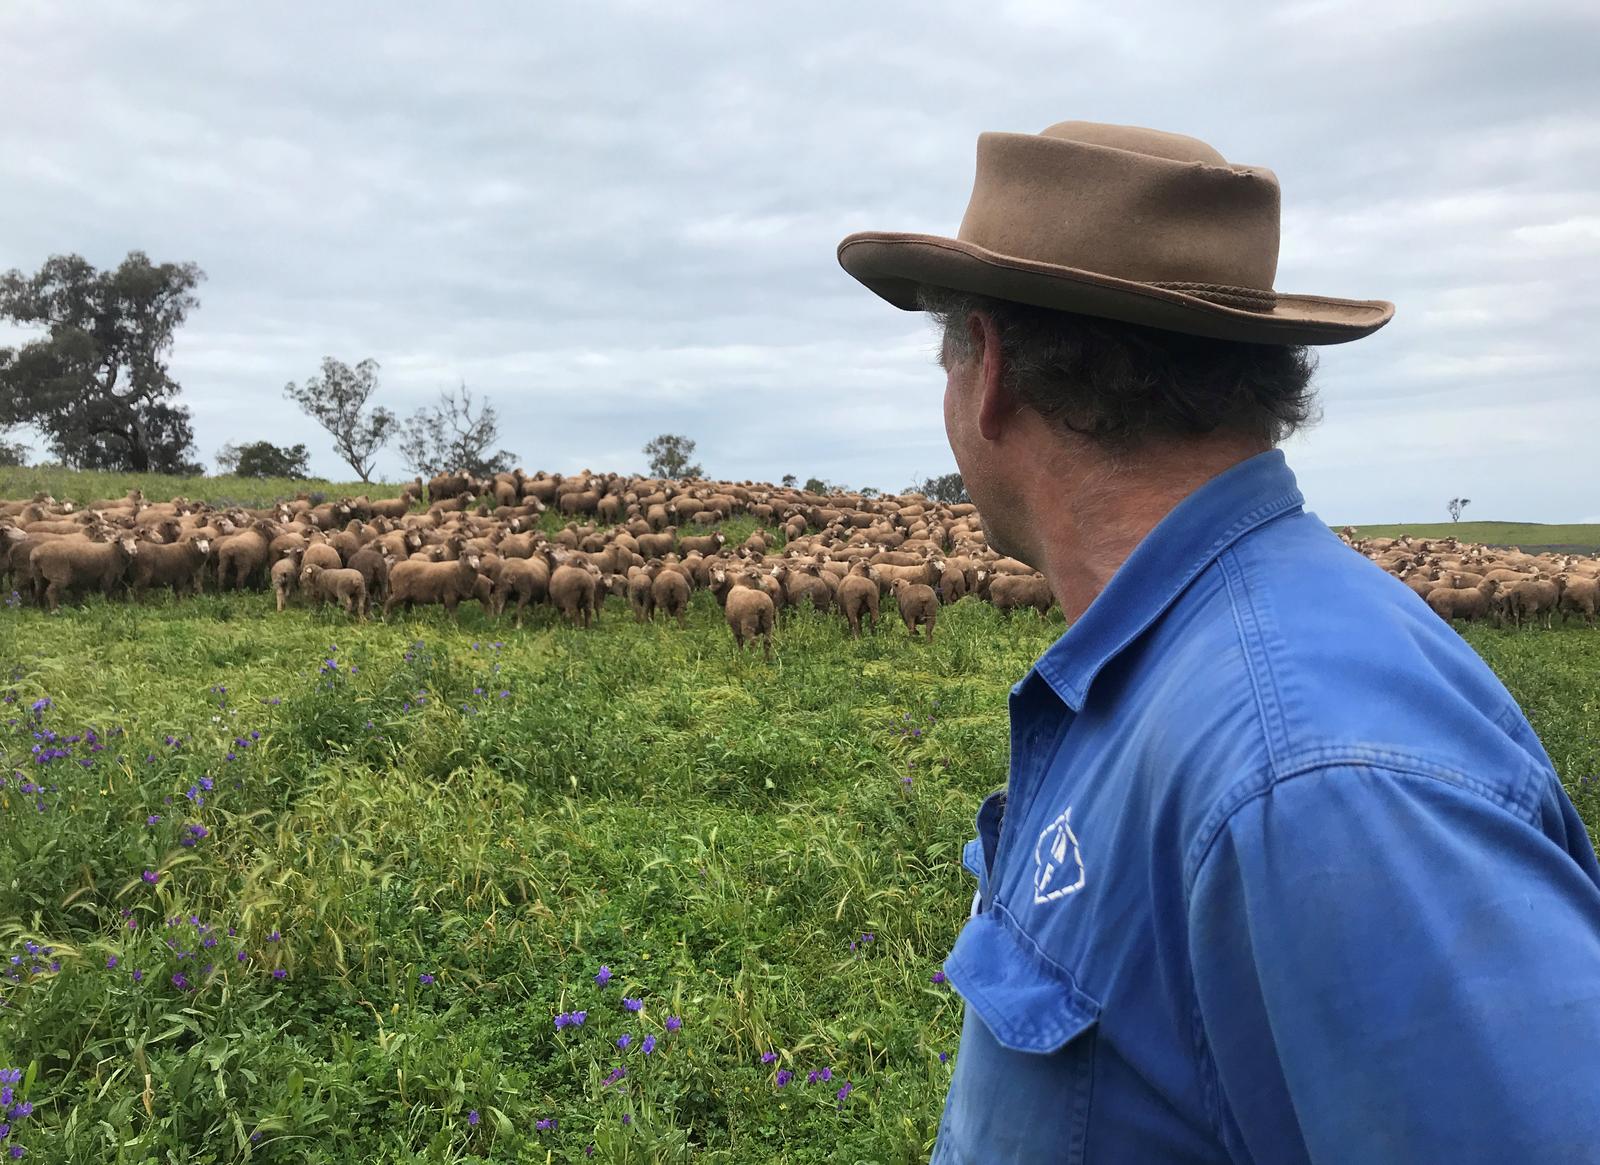 Wool and sheep producer Micheal Field looks at his merino sheep on the property 'Benangaroo' in Jugiong, New South Wales, Australia October 7, 2020. Photo: Reuters